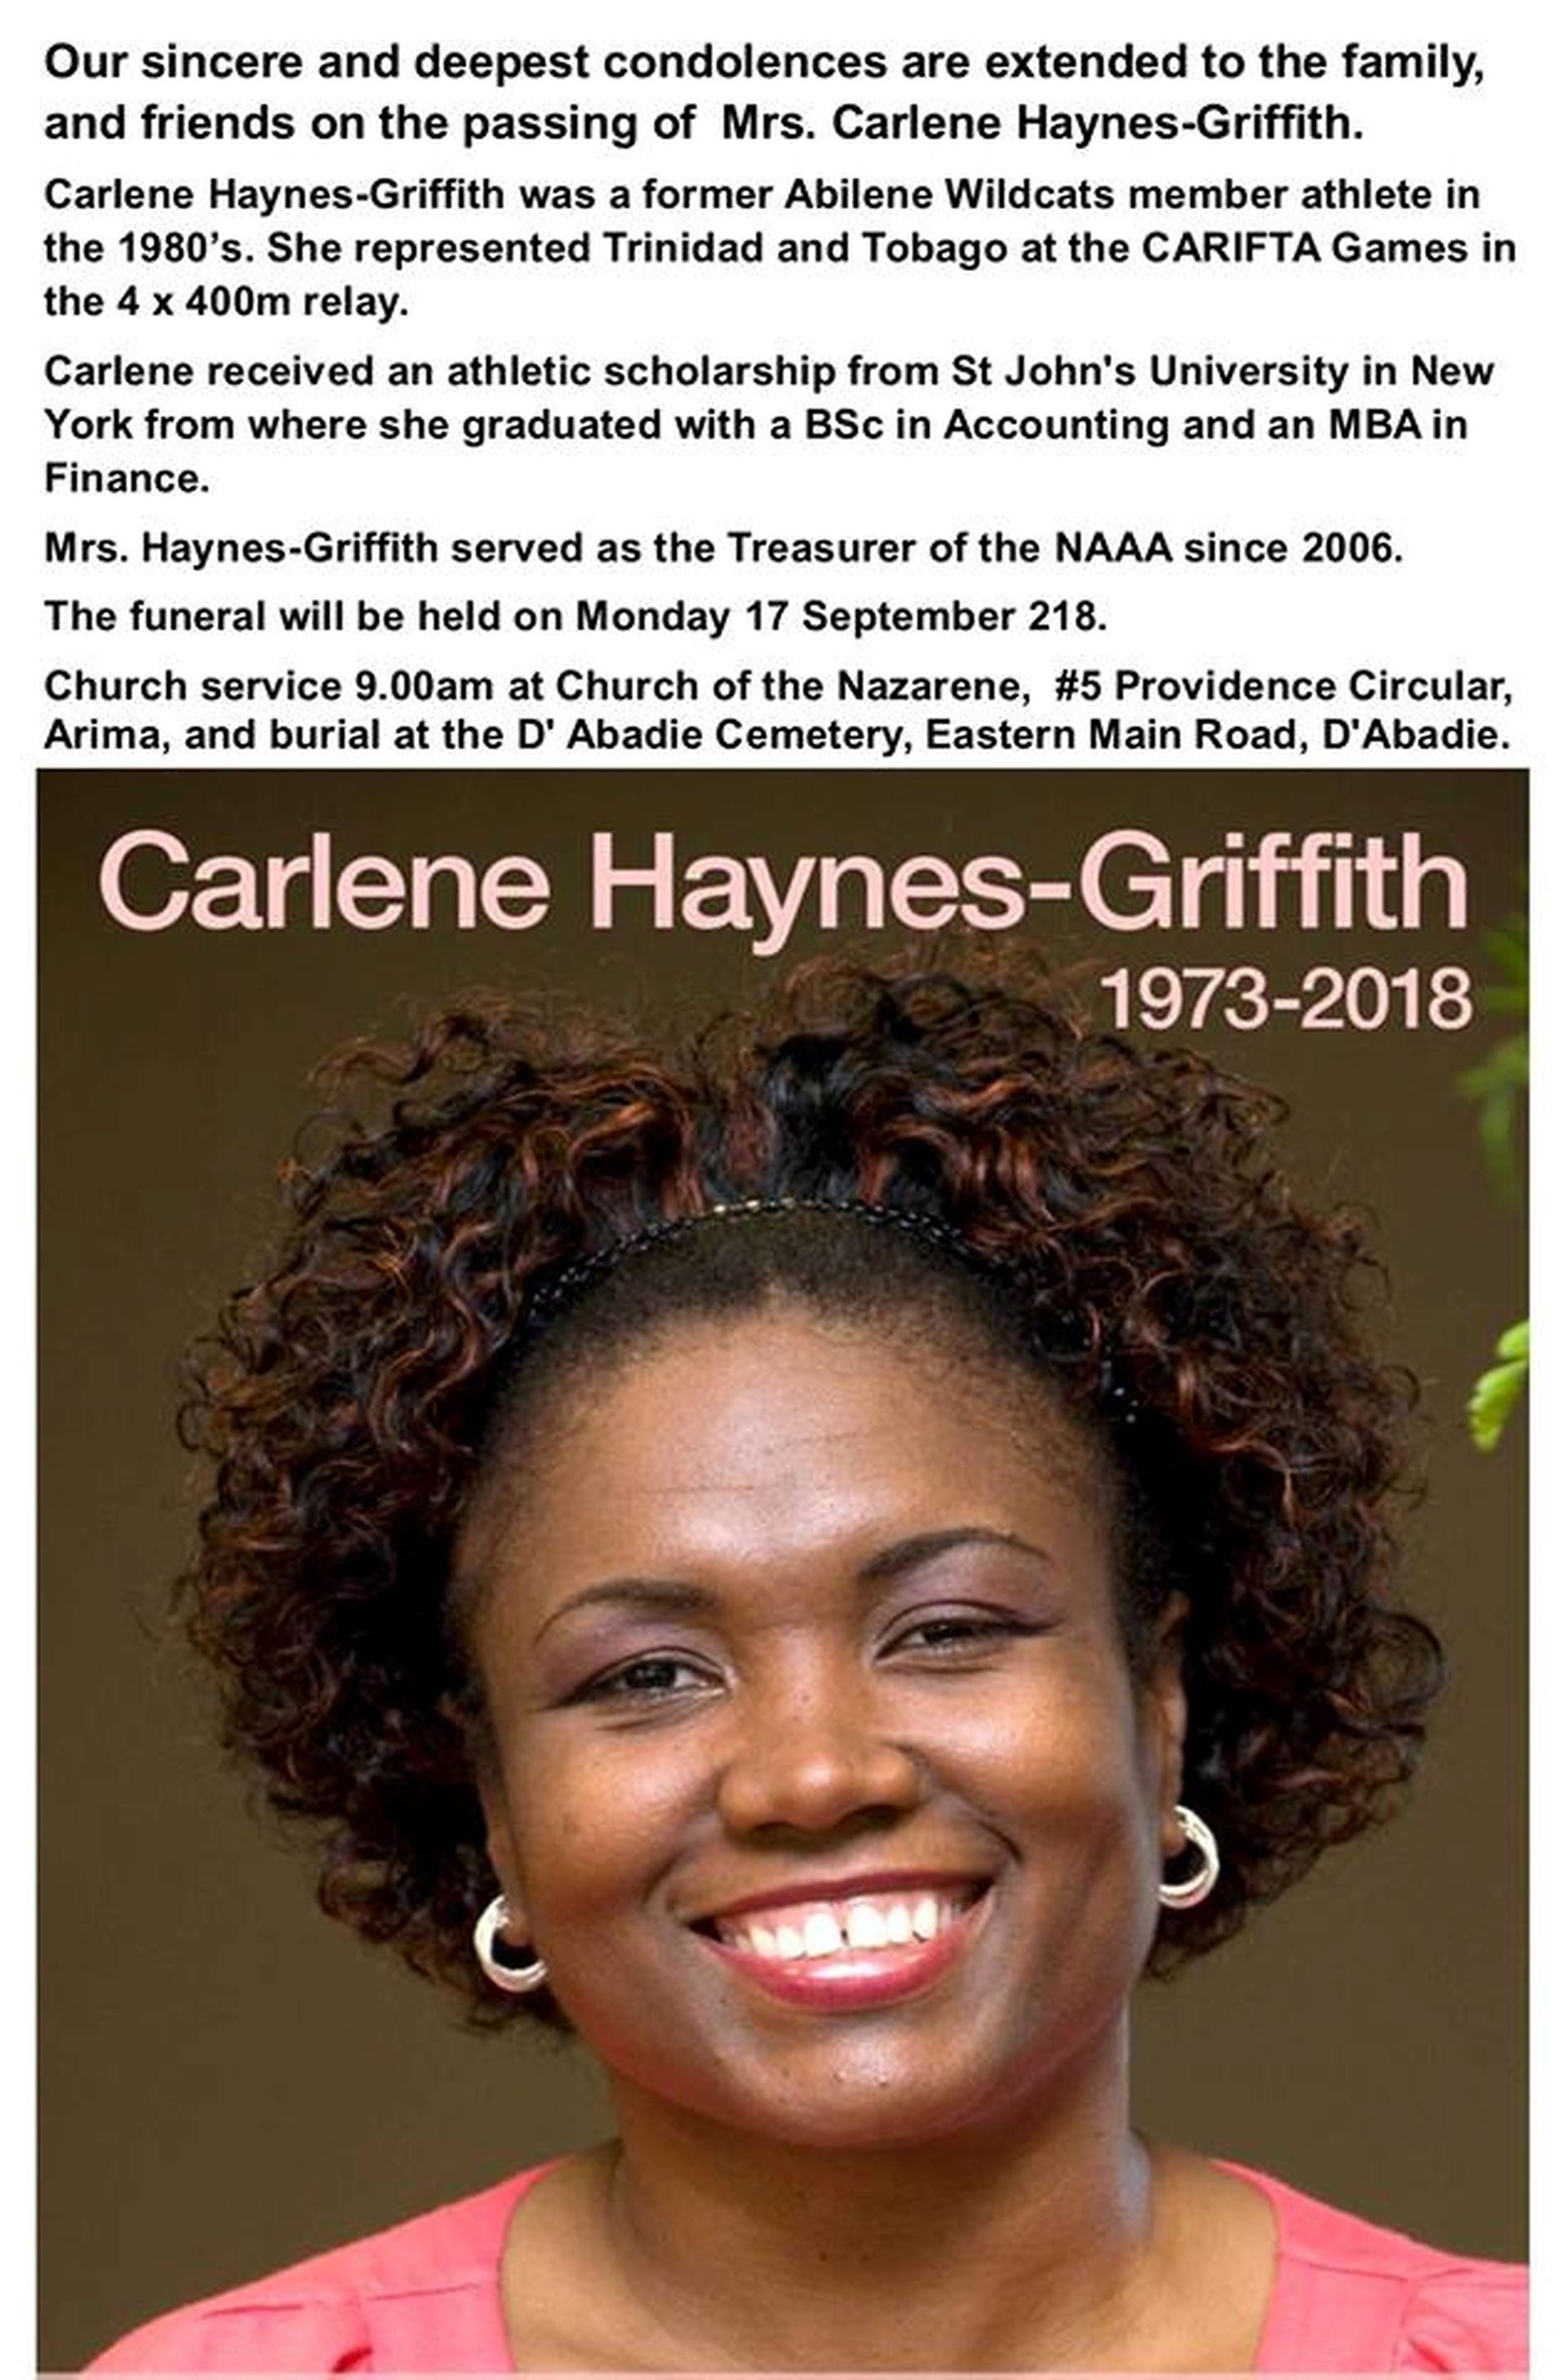 Carlene Haynes-Griffith to be buried today